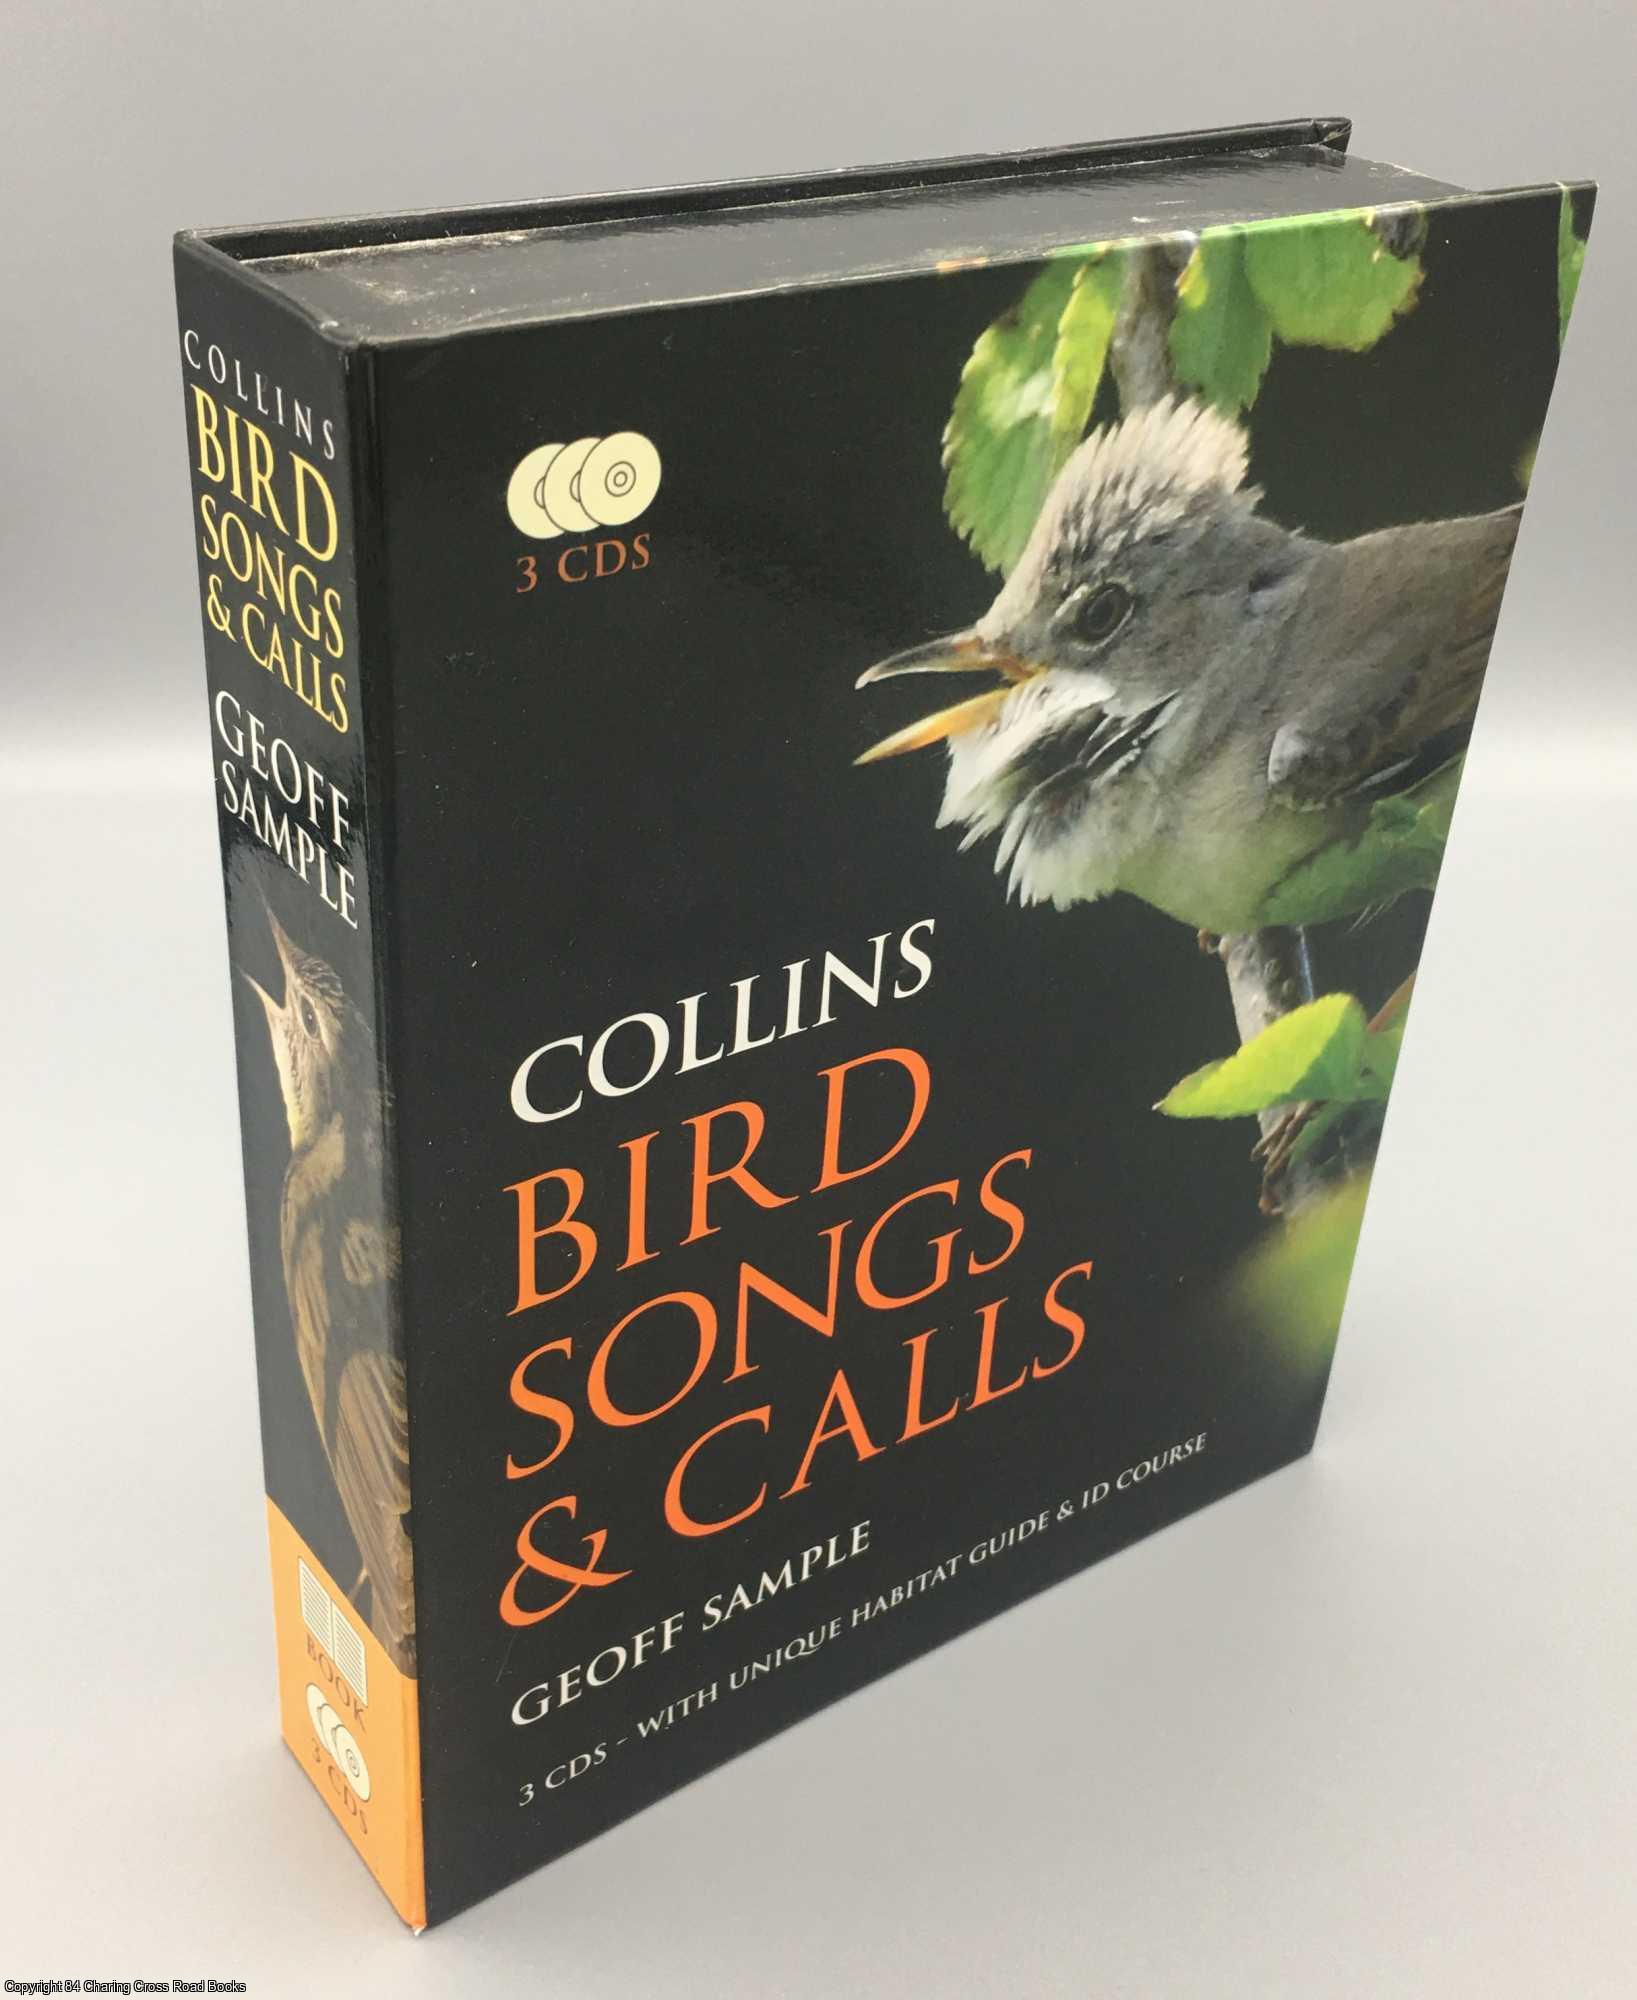 Sample, Geoff - Collins Bird Songs and Calls